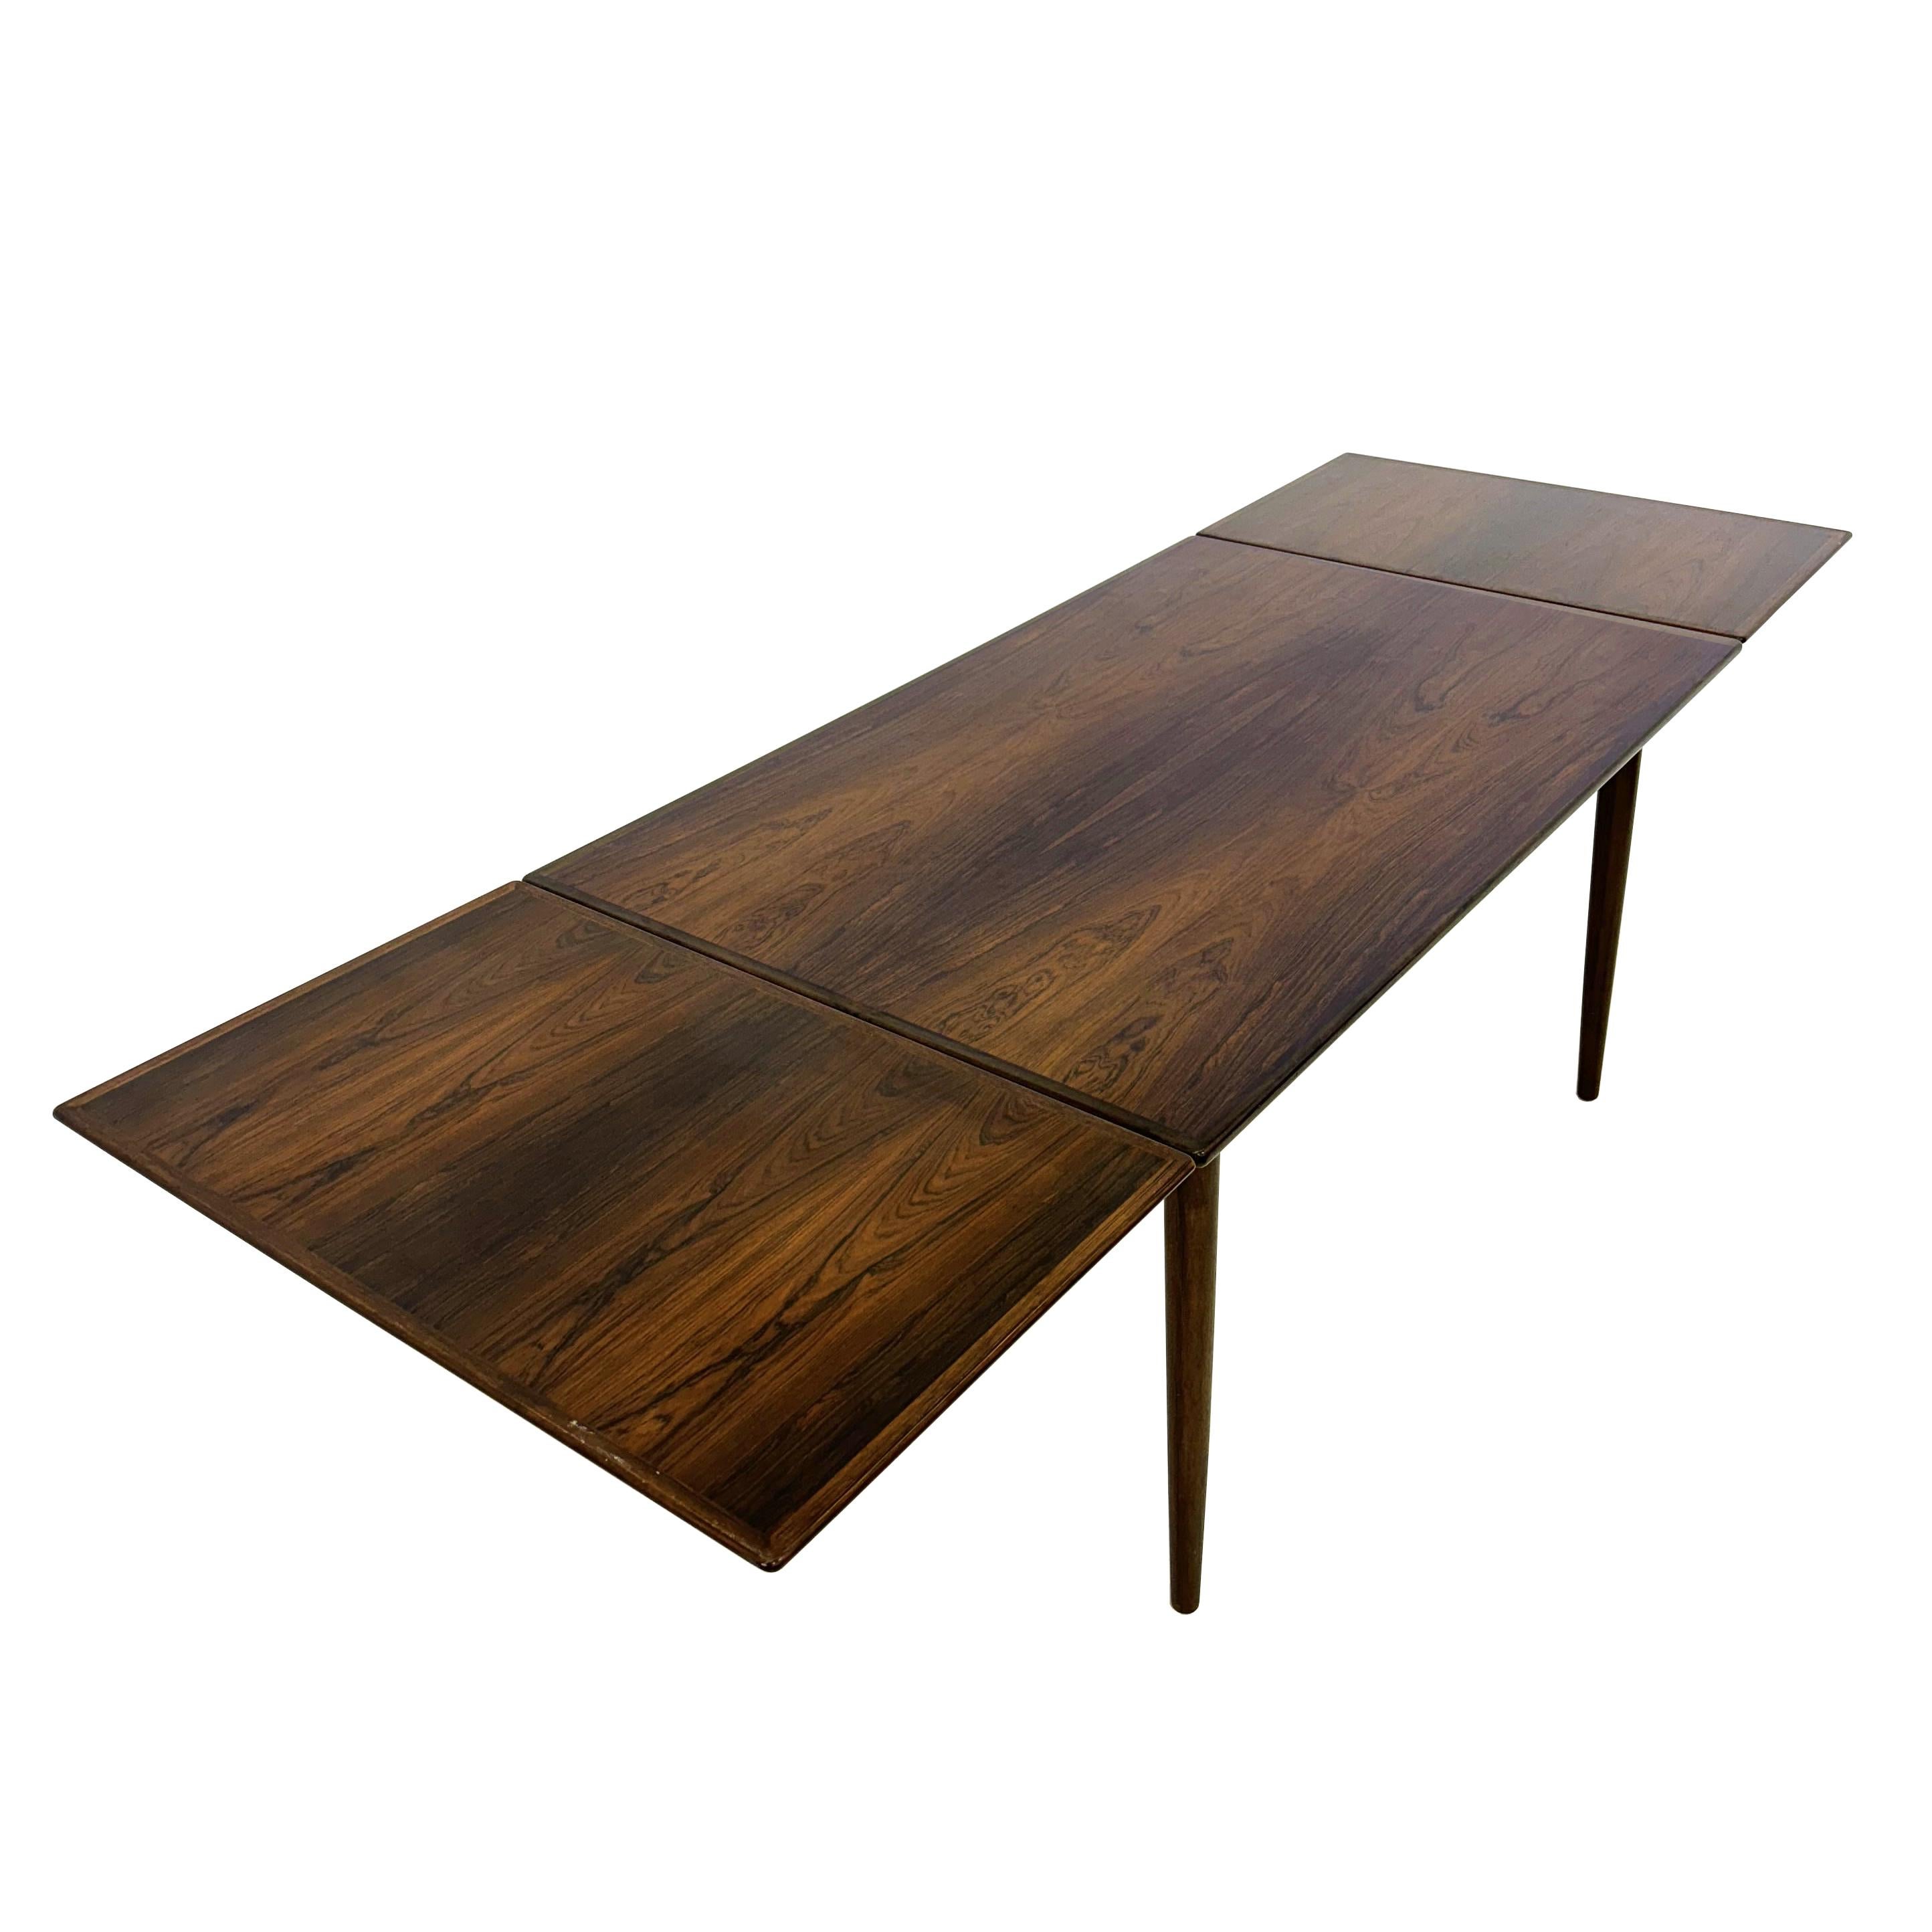 Dining table model 54  designed in 1962 by Gunni Omann and manufactured by Omann Junior Denmark.
This. model  can be extended to a total length of about 245 cm.
Extensions while not in use slide under the table 

Dimensions: 73 cm hight x 145/245 cm